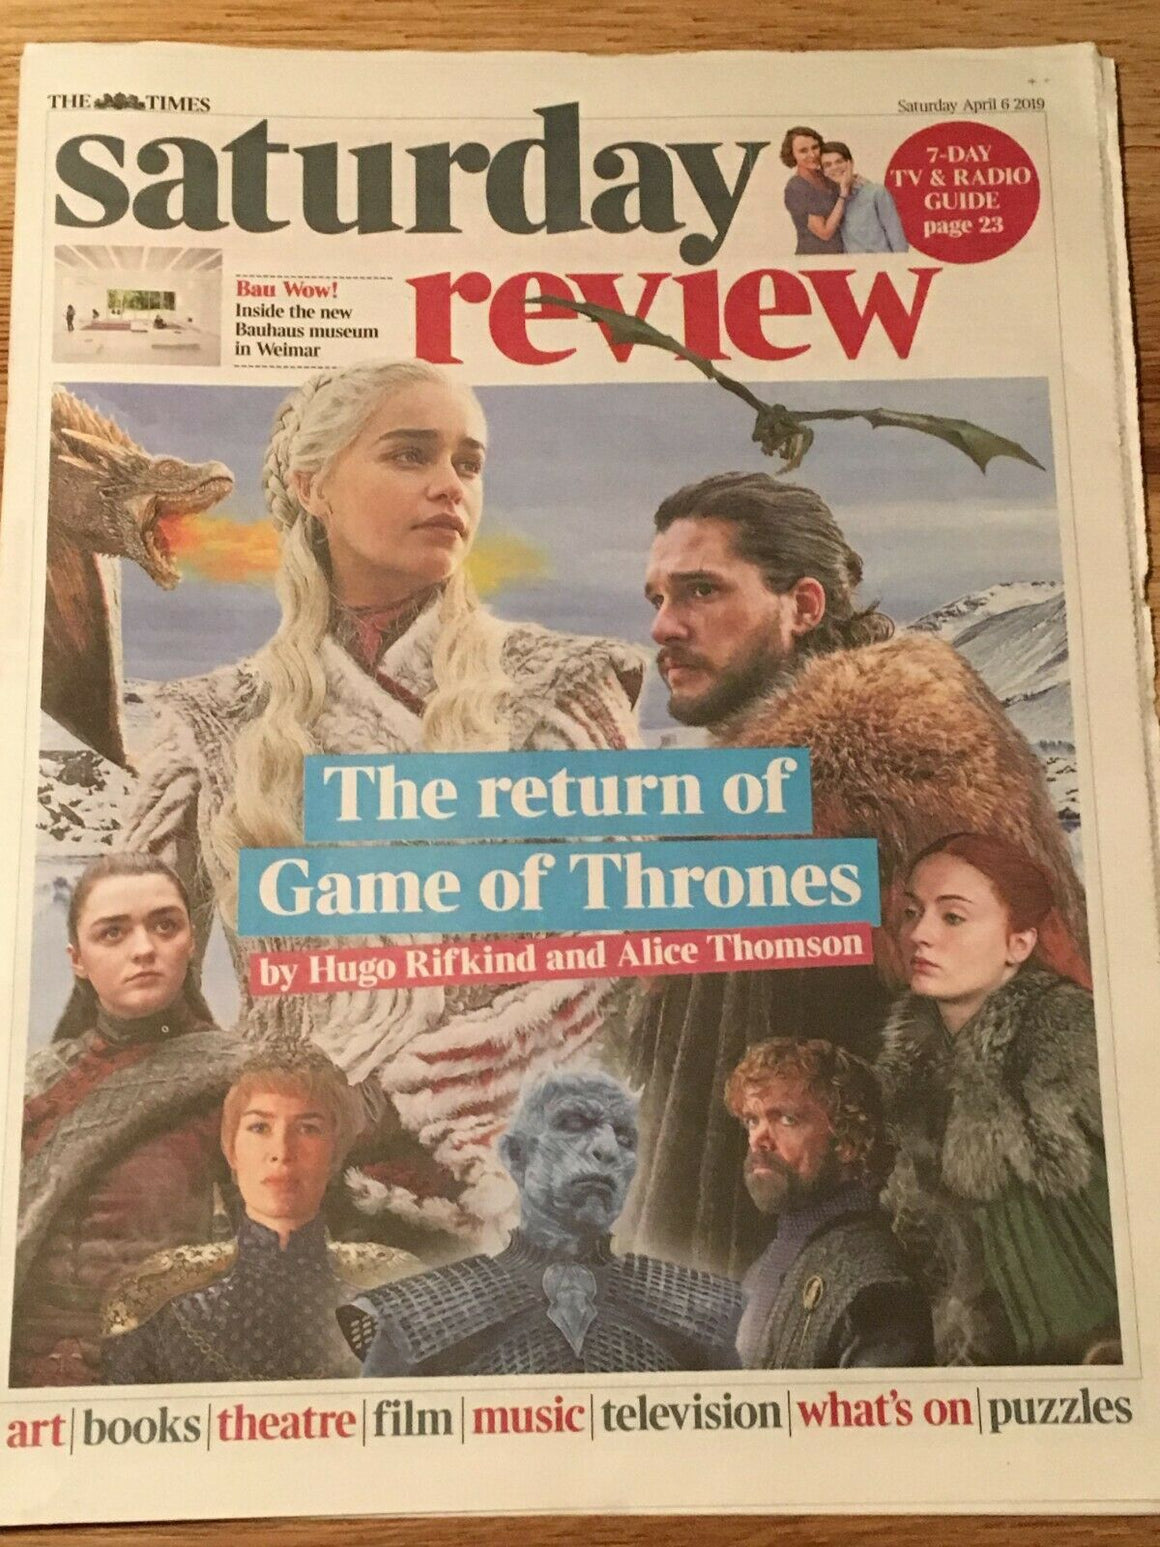 UK Times Review April 2019 Game Of Thrones (GOT) cover & feature - Lena Headey